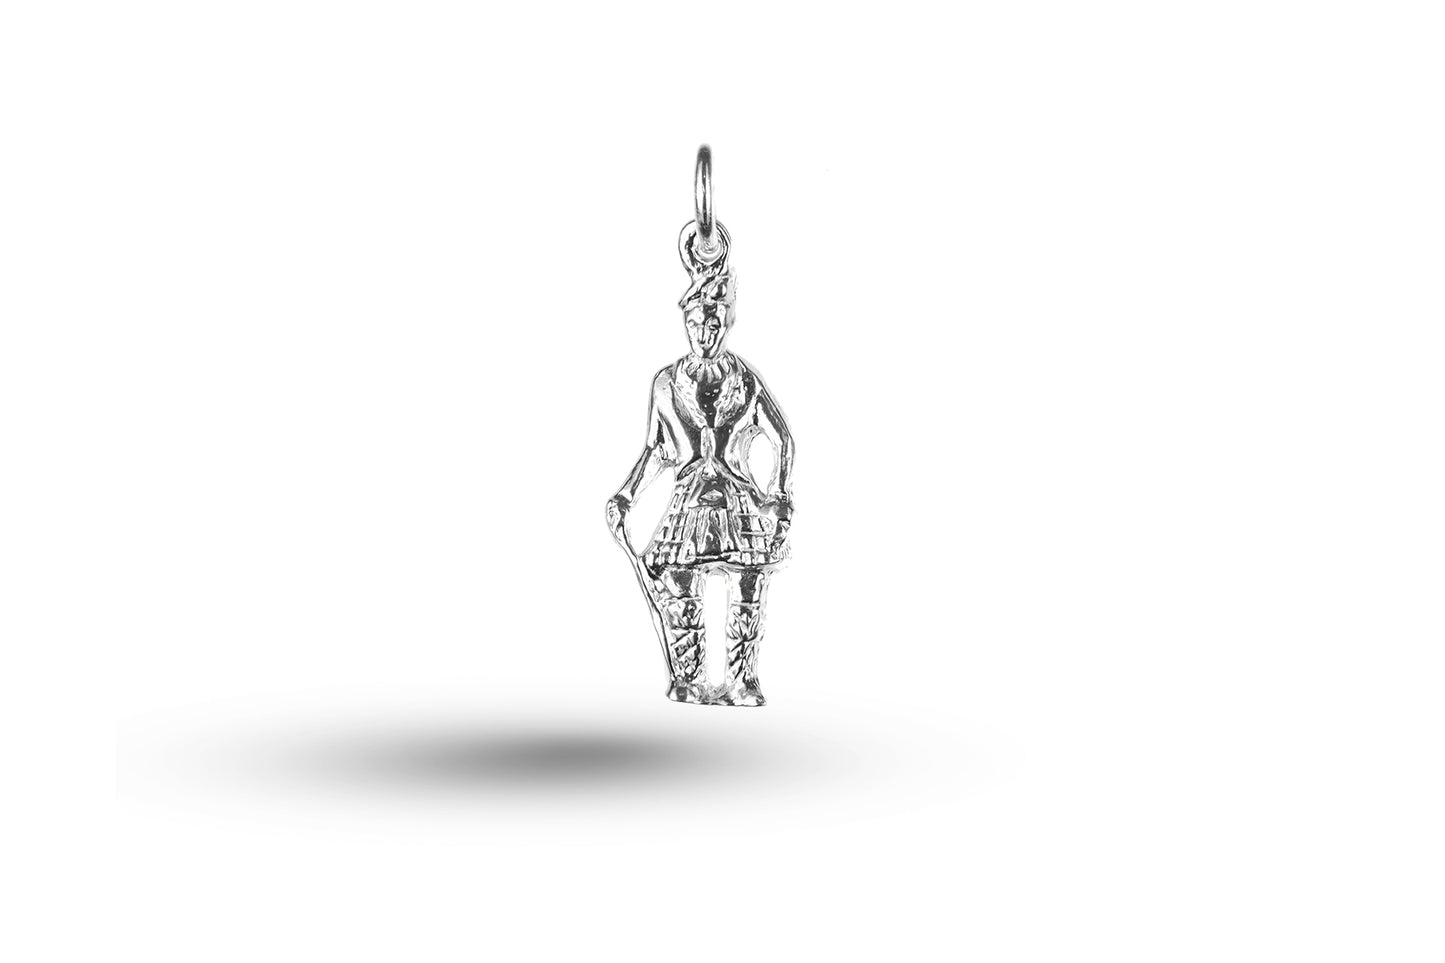 White gold Scotsman with Cane charm.